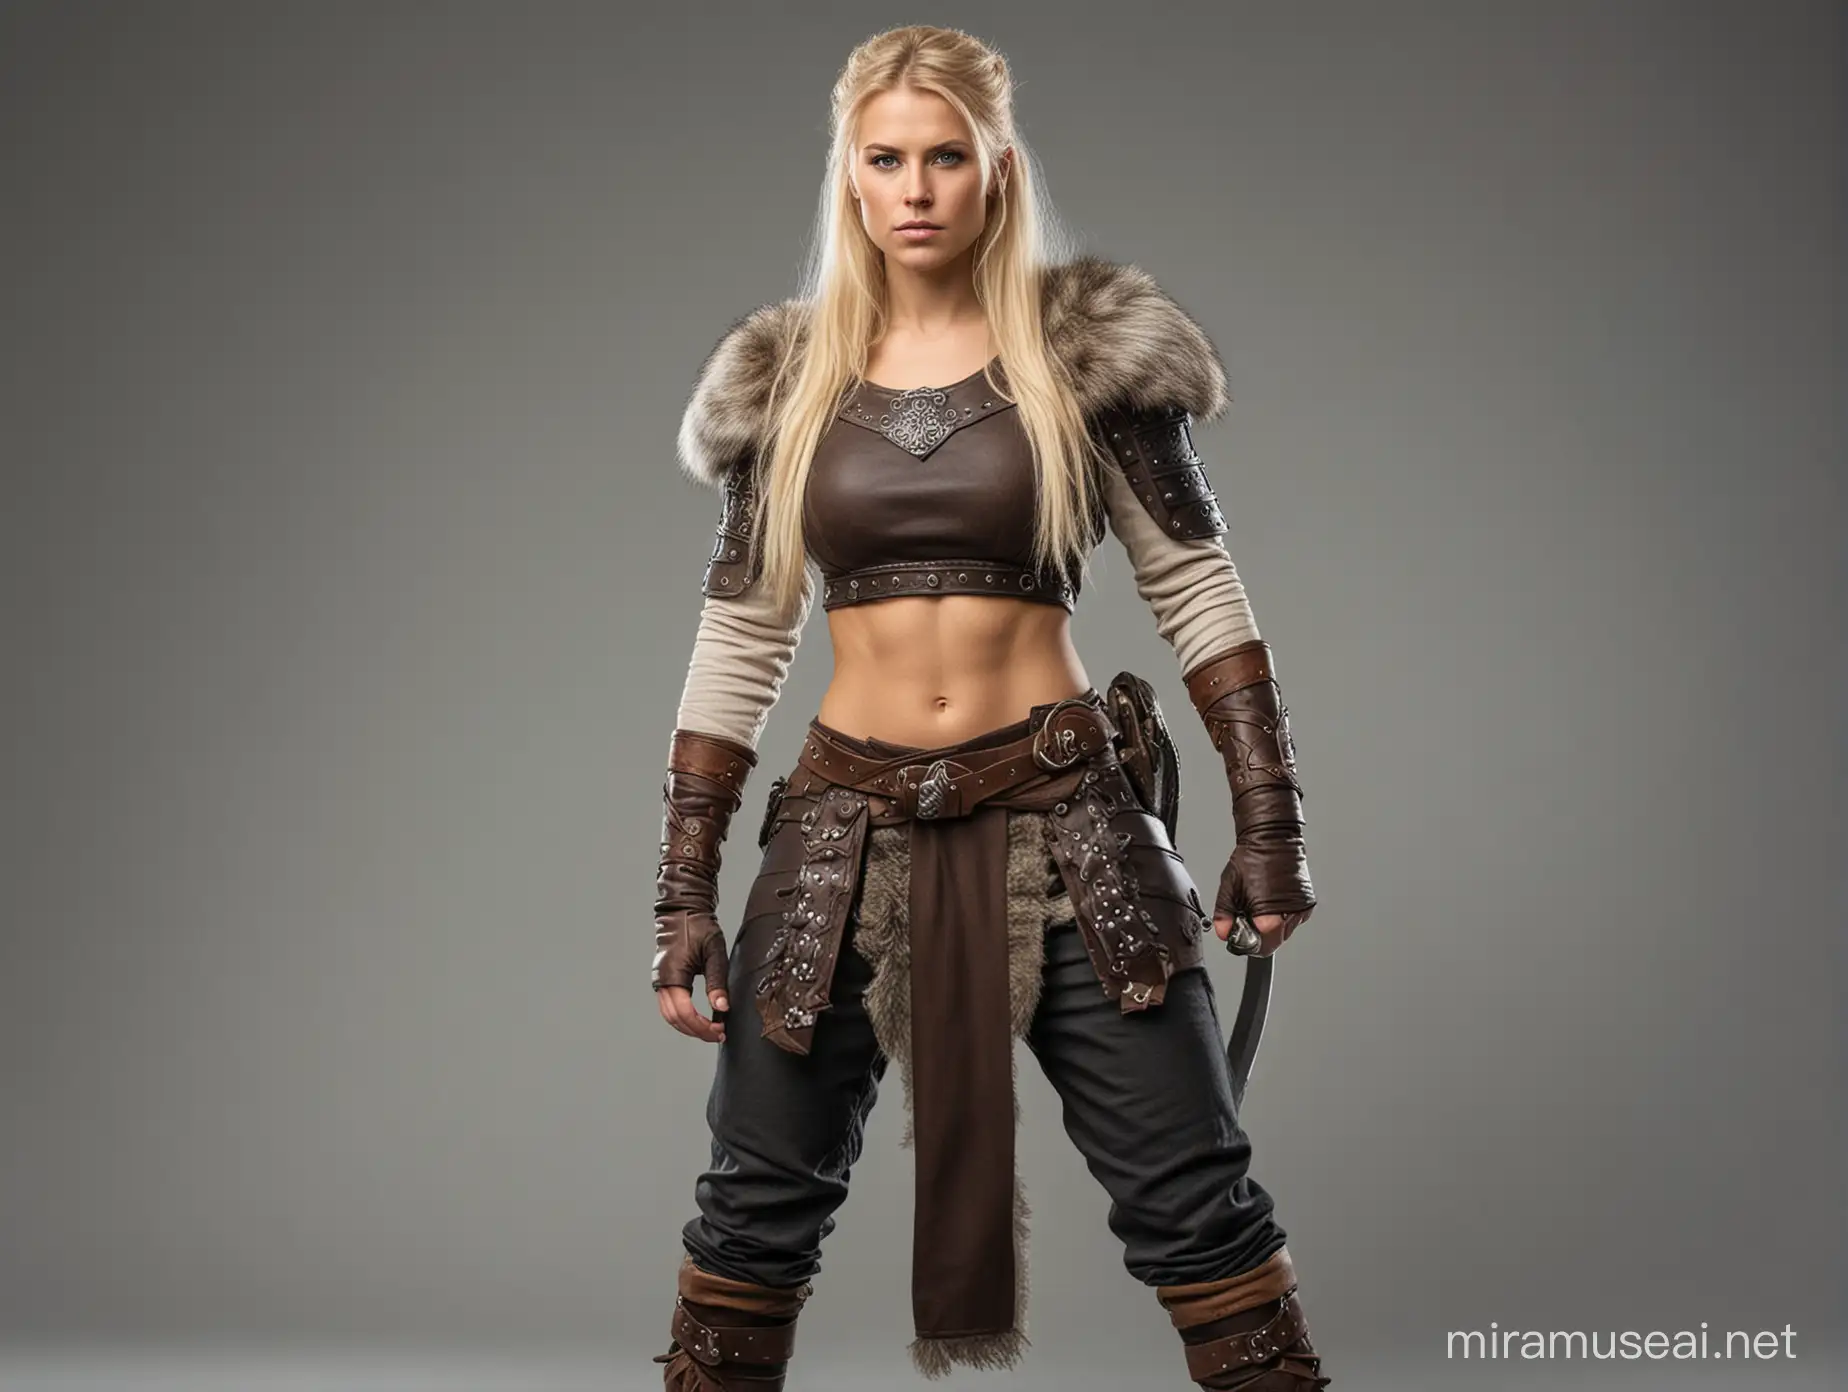 viking woman with blonde hair, full view wearing pants and warrior gear
